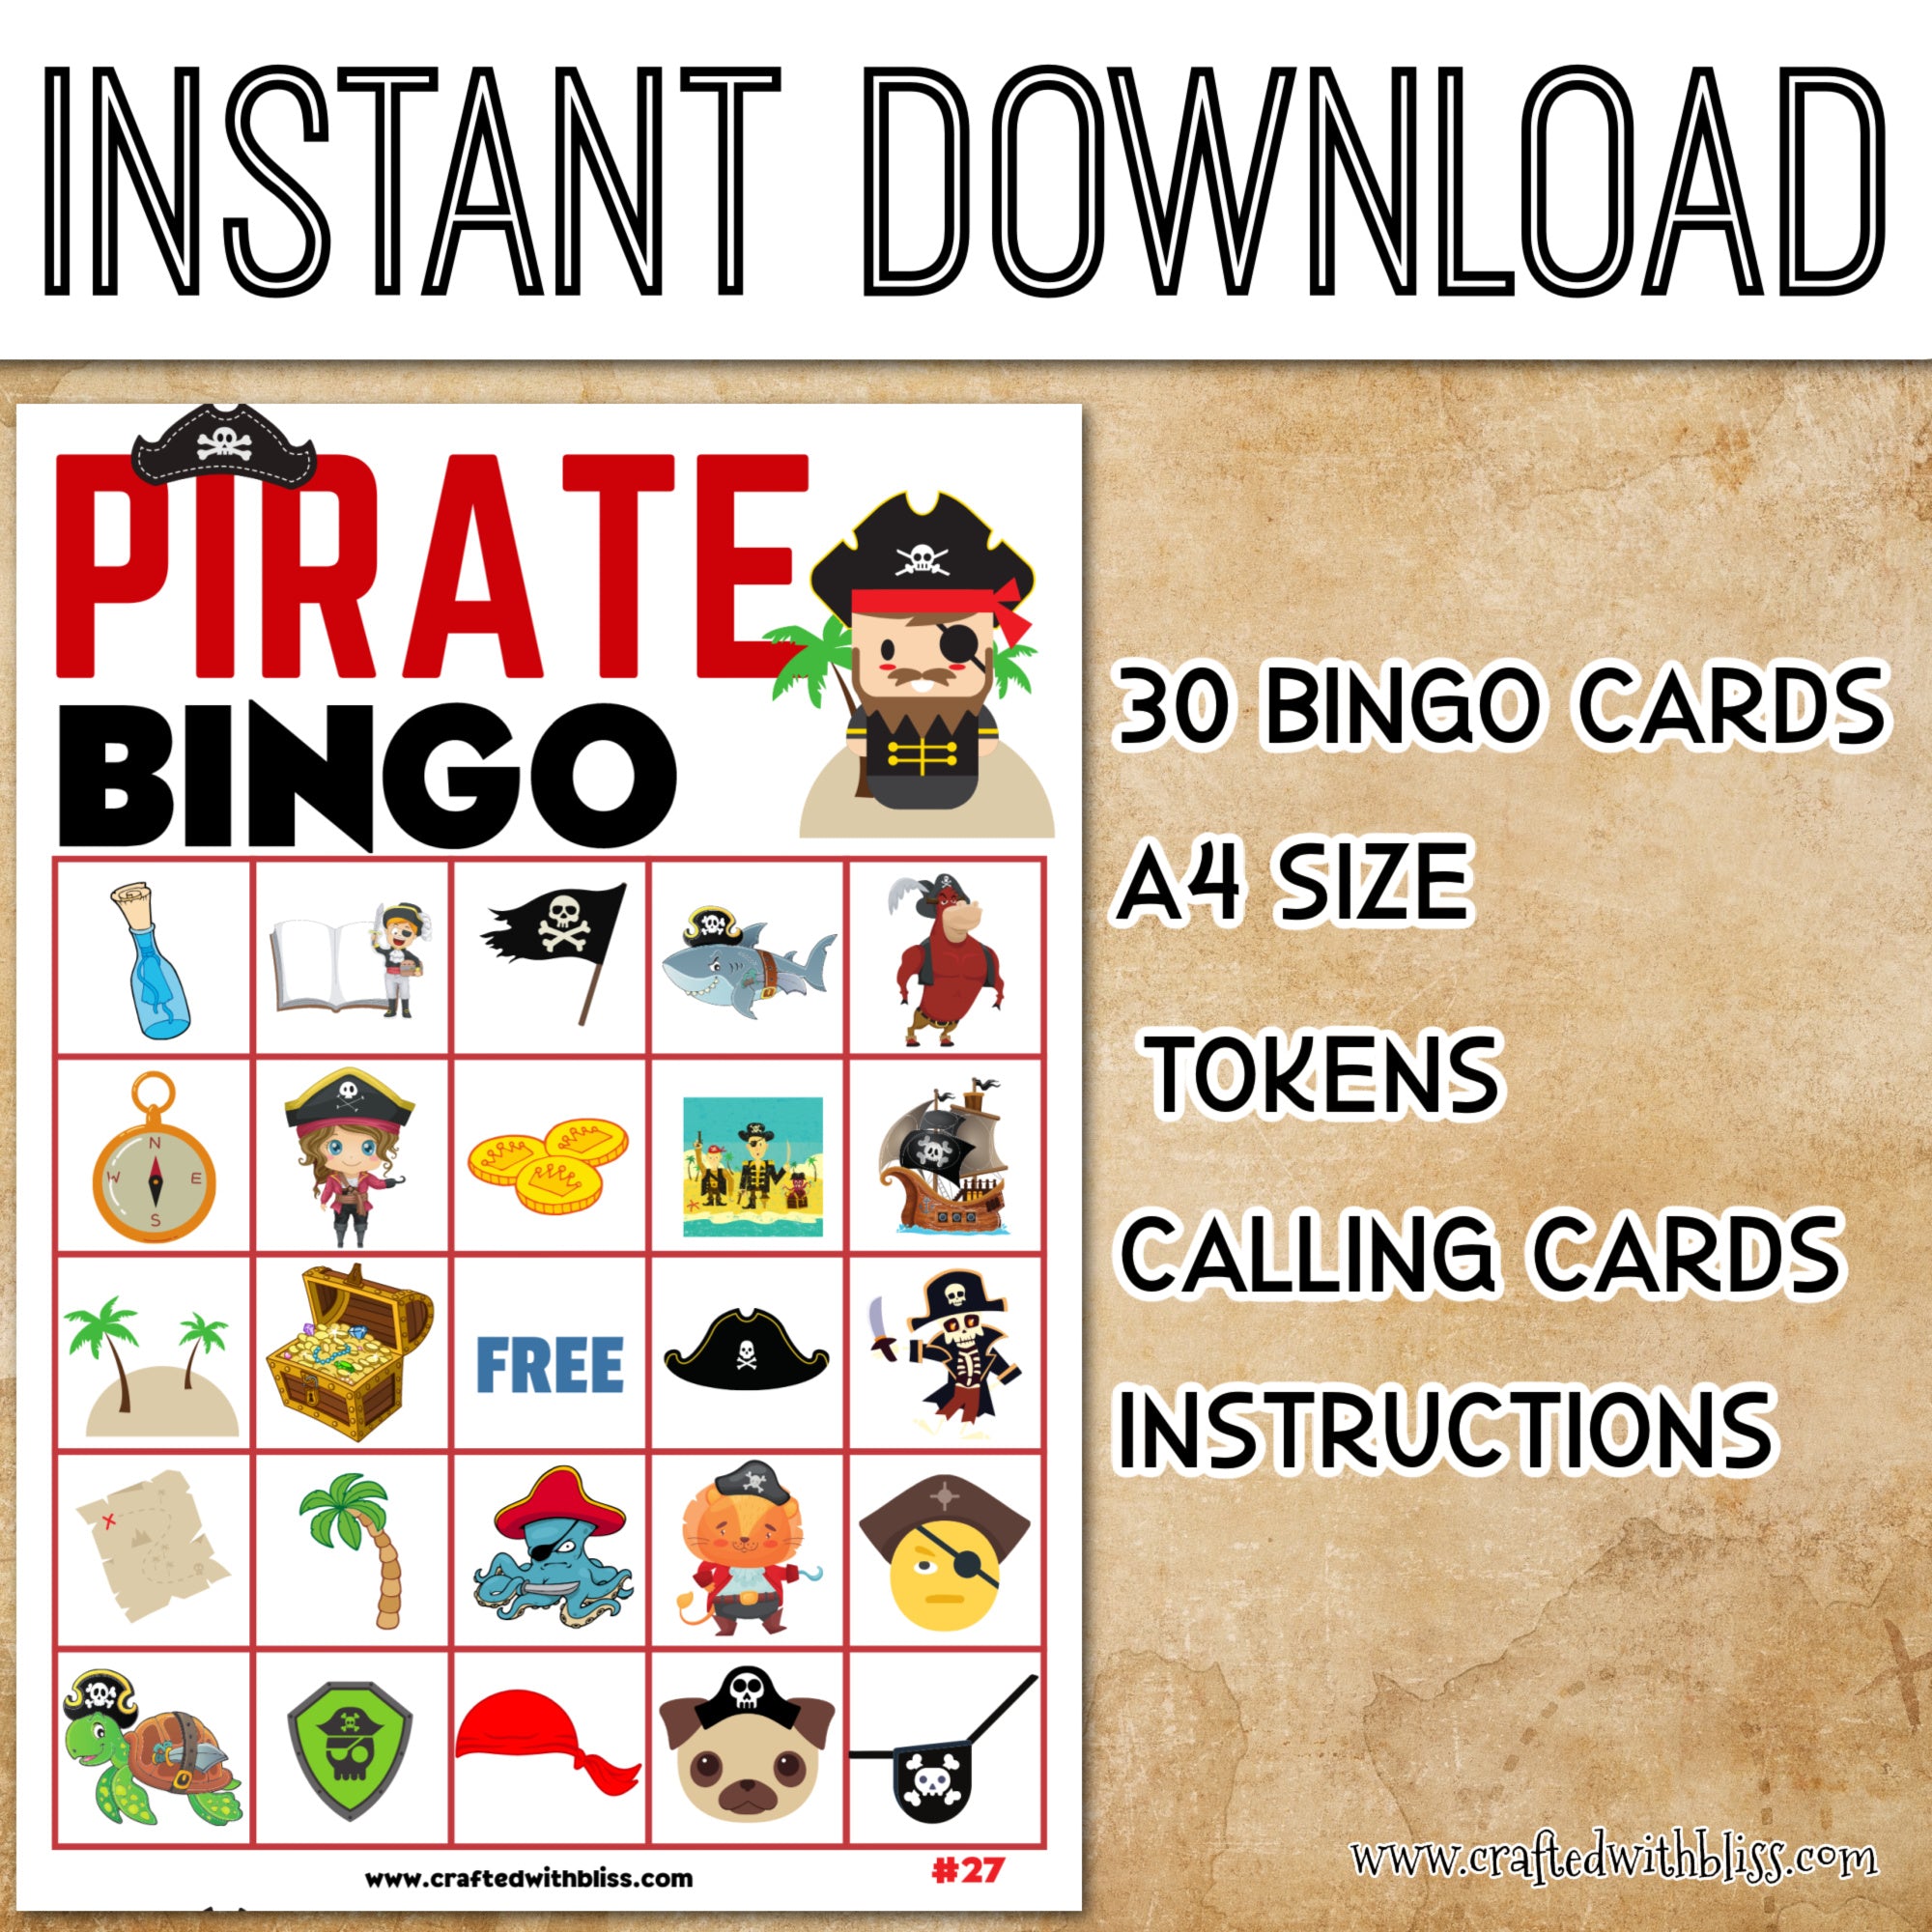 pirate-bingo-for-kids-30-cards-craftedwithbliss